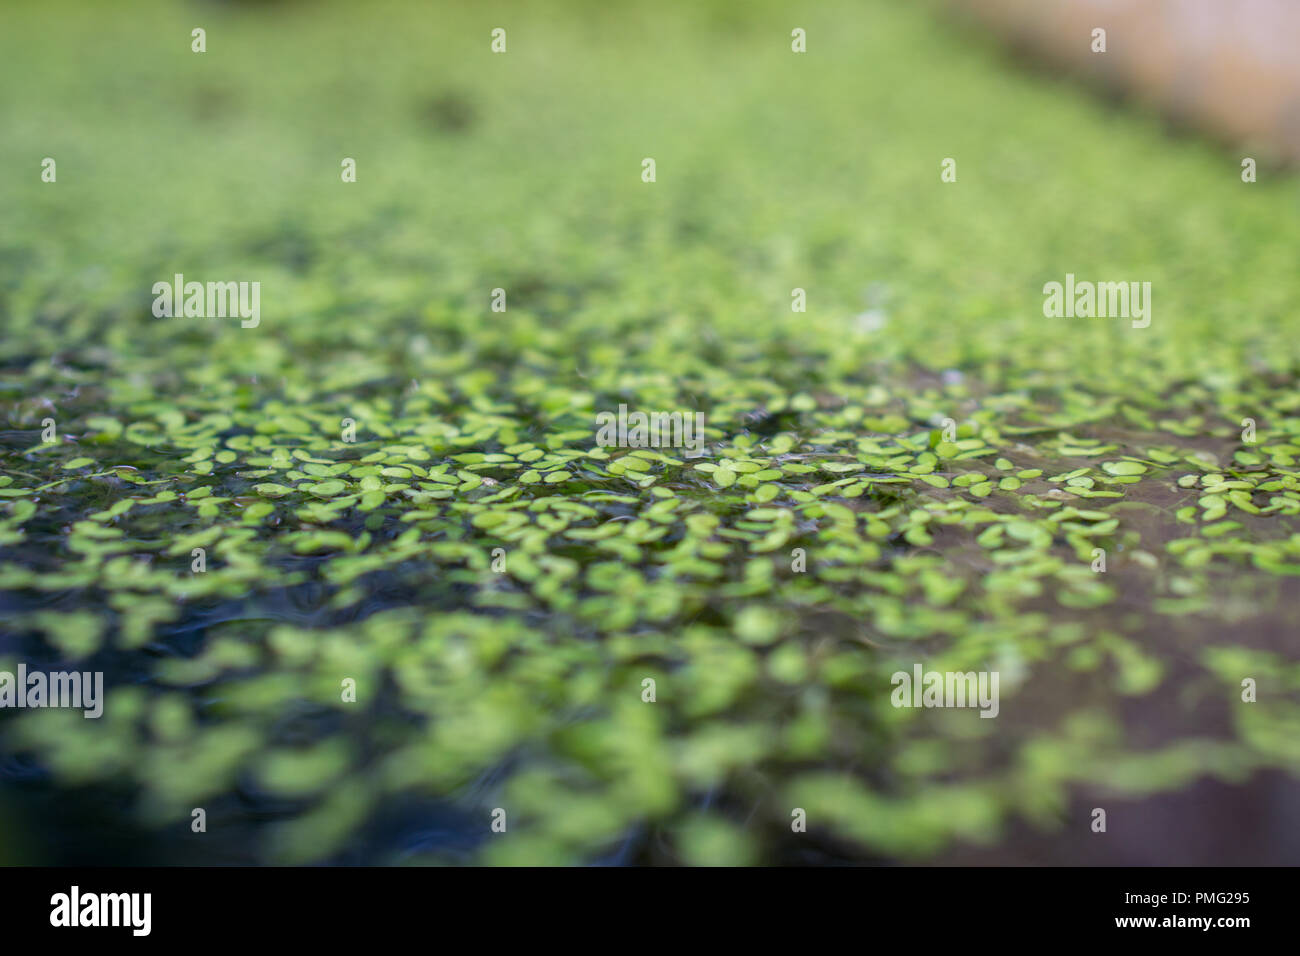 Duckweeds covering a small pond Stock Photo